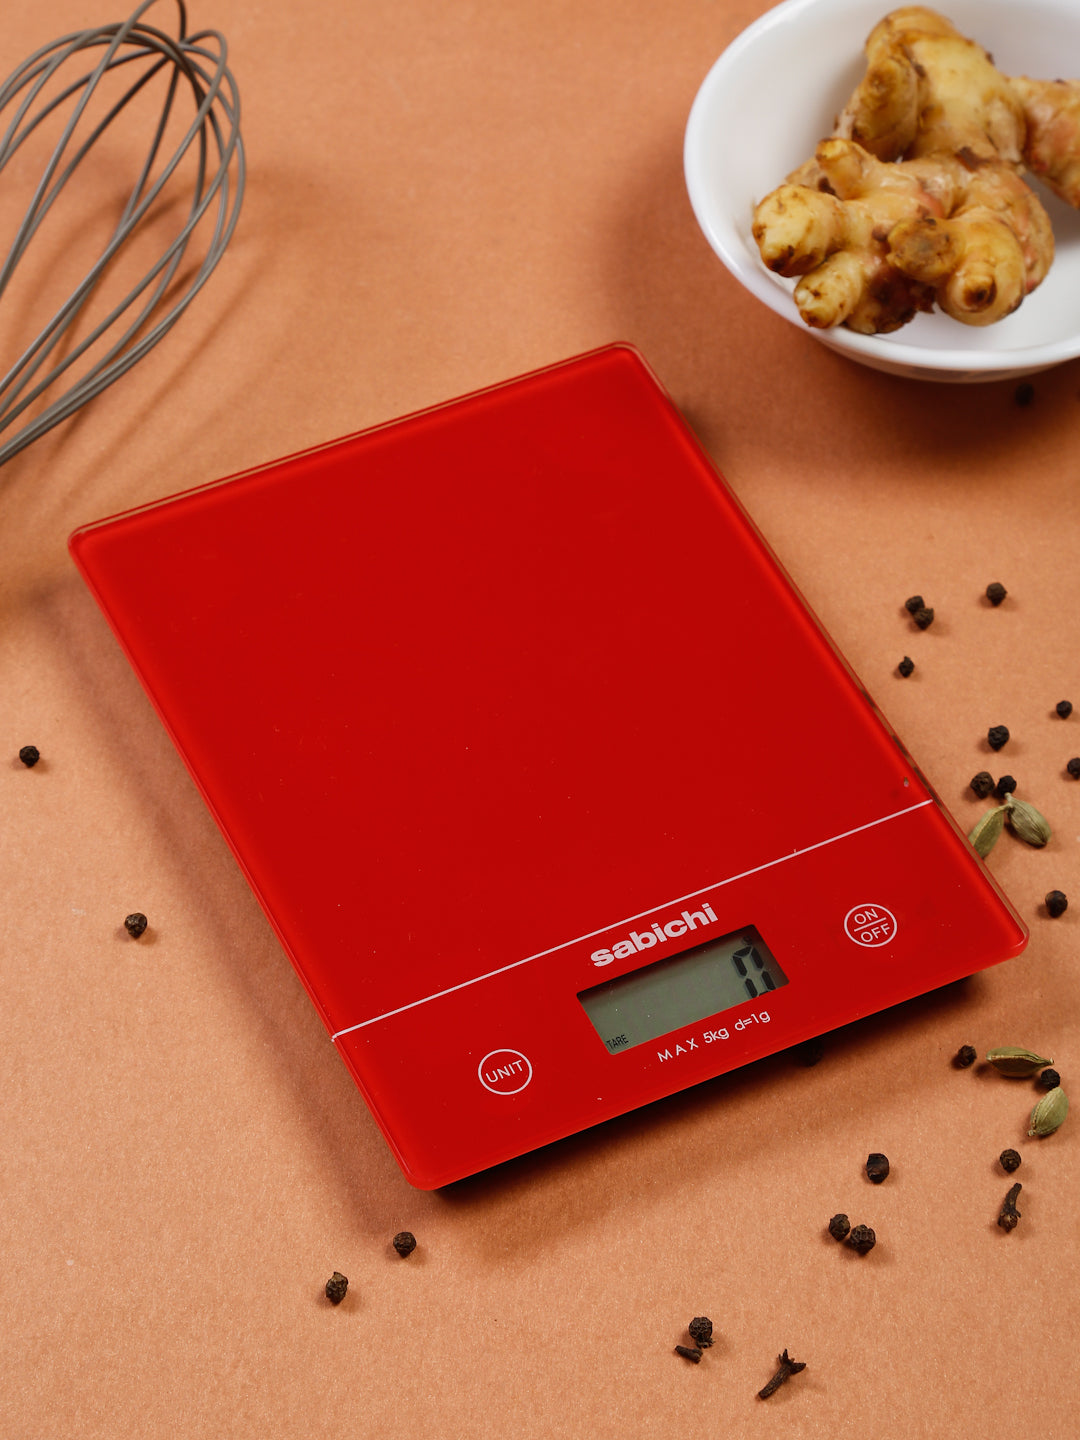 Digital food scale for diet, kitchen scale 5kg capacity stainless steel,  digital kitchen scale